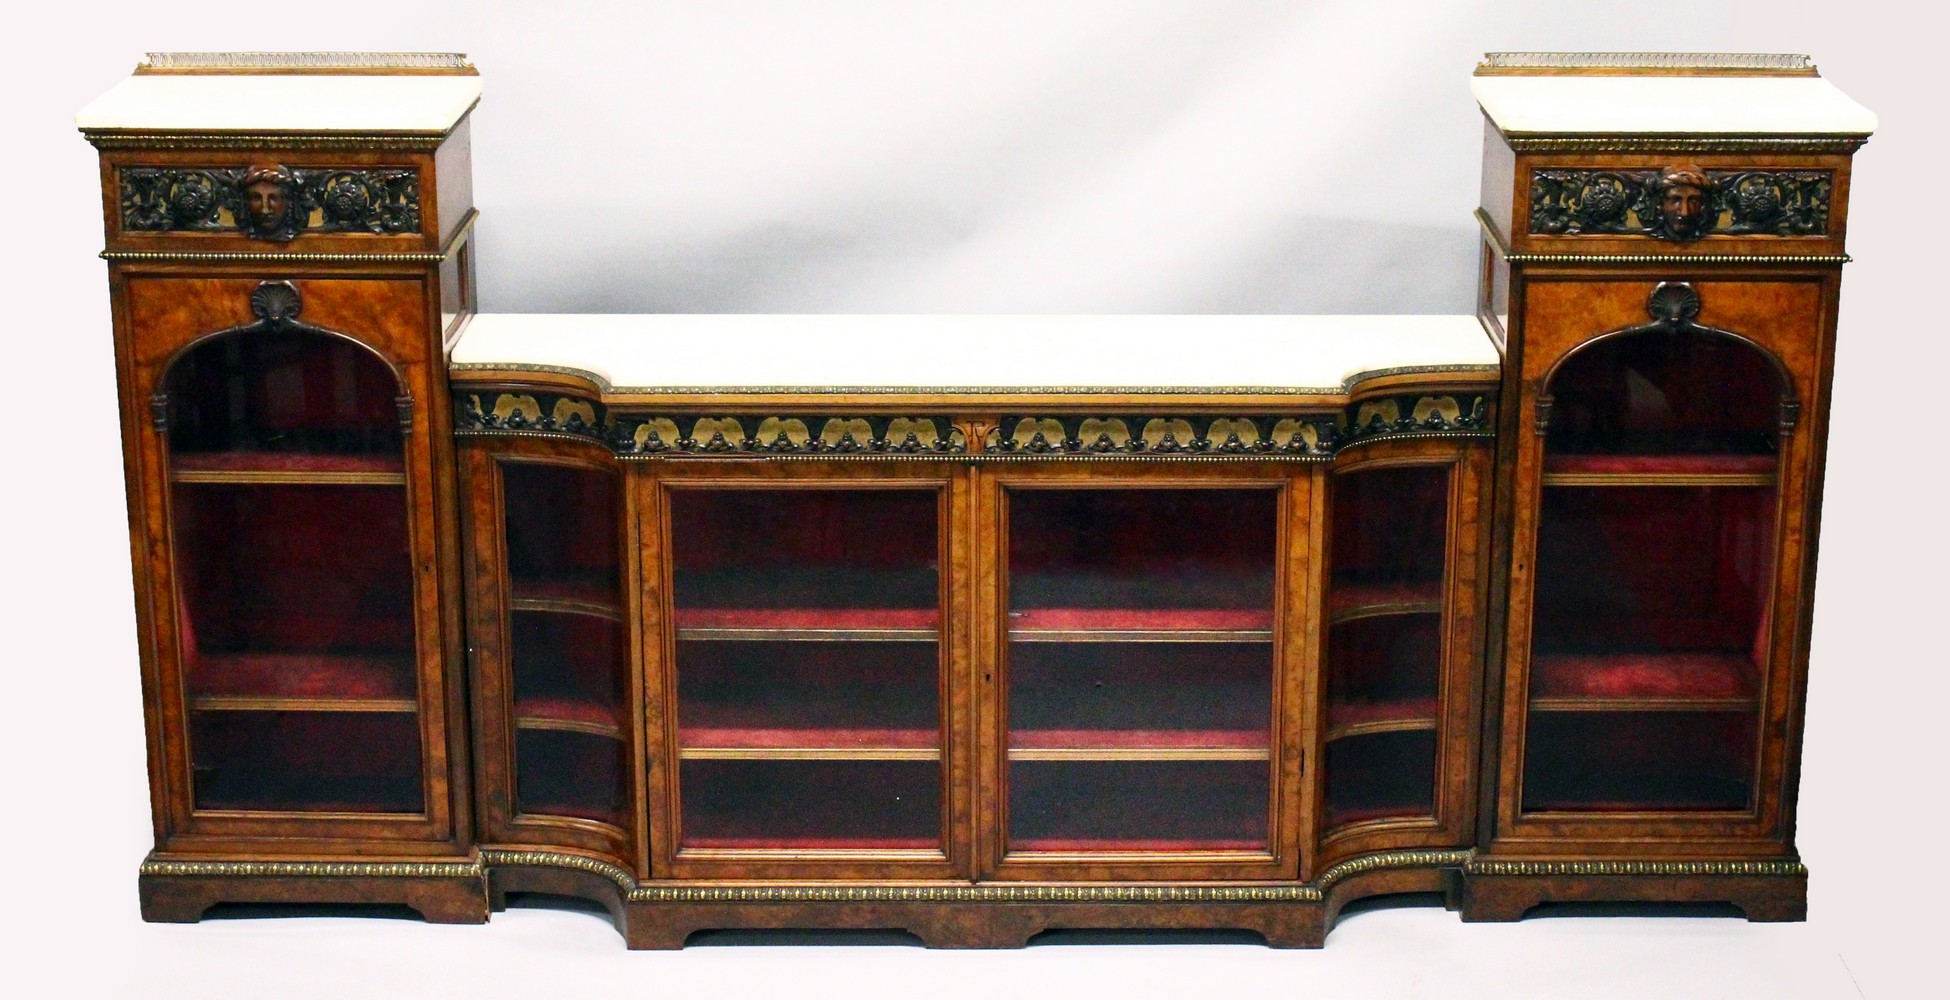 IN THE MANNER OF GILLOW, A SUPERB BURR WALNUT, ORMOLU AND MARBLE BREAKFRONT SIDE CABINET, the centre